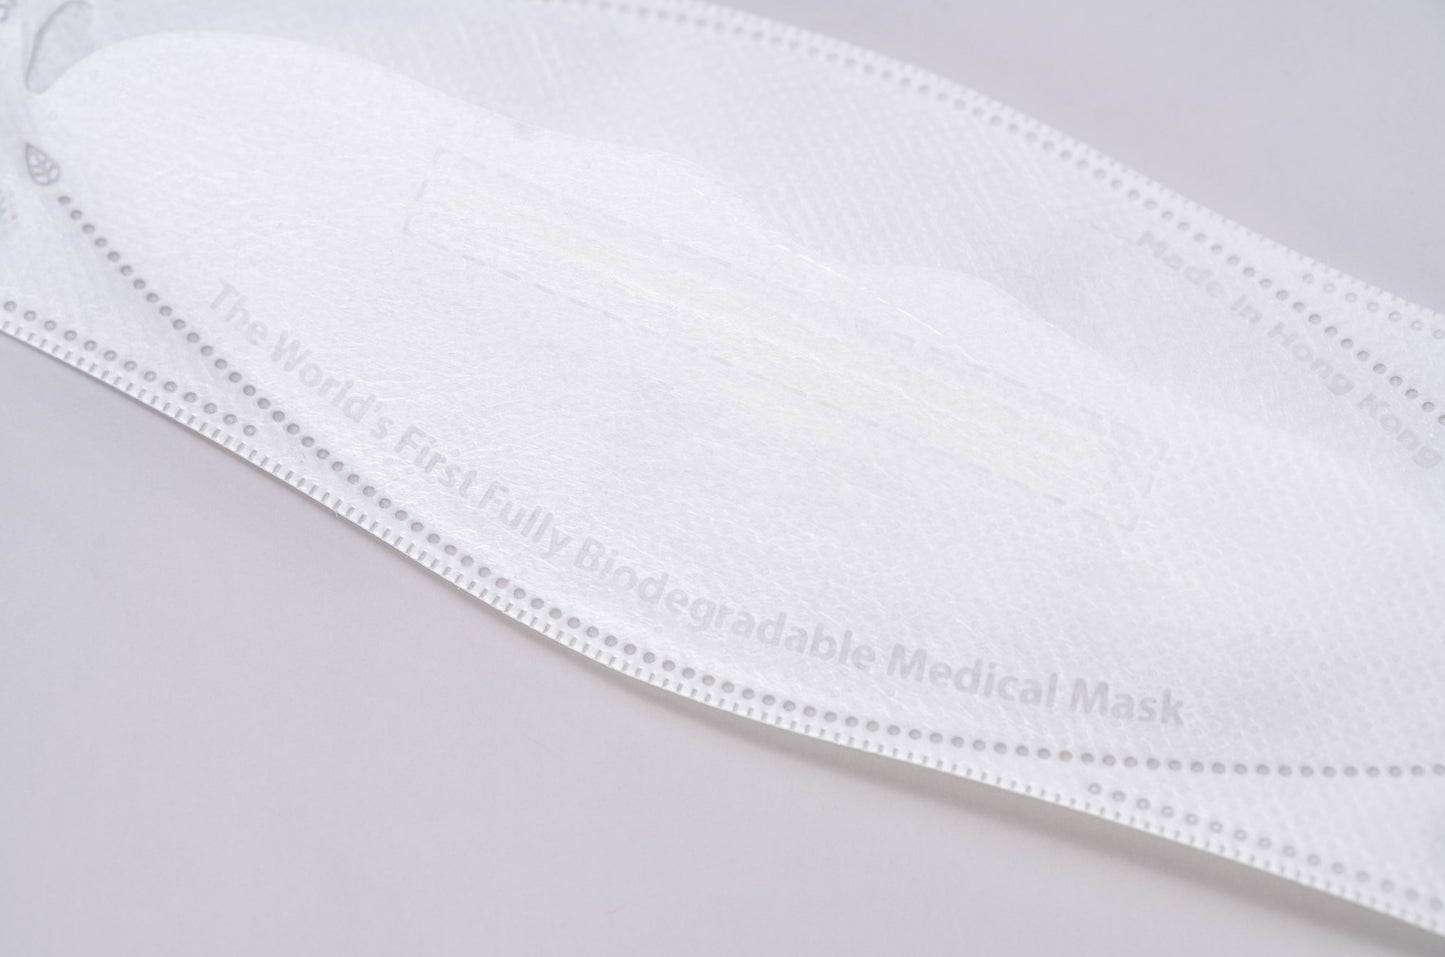 ÖKOSIX® Fully Biodegradable Level 3 Surgical Mask - Adult M - White - 6 pieces per box